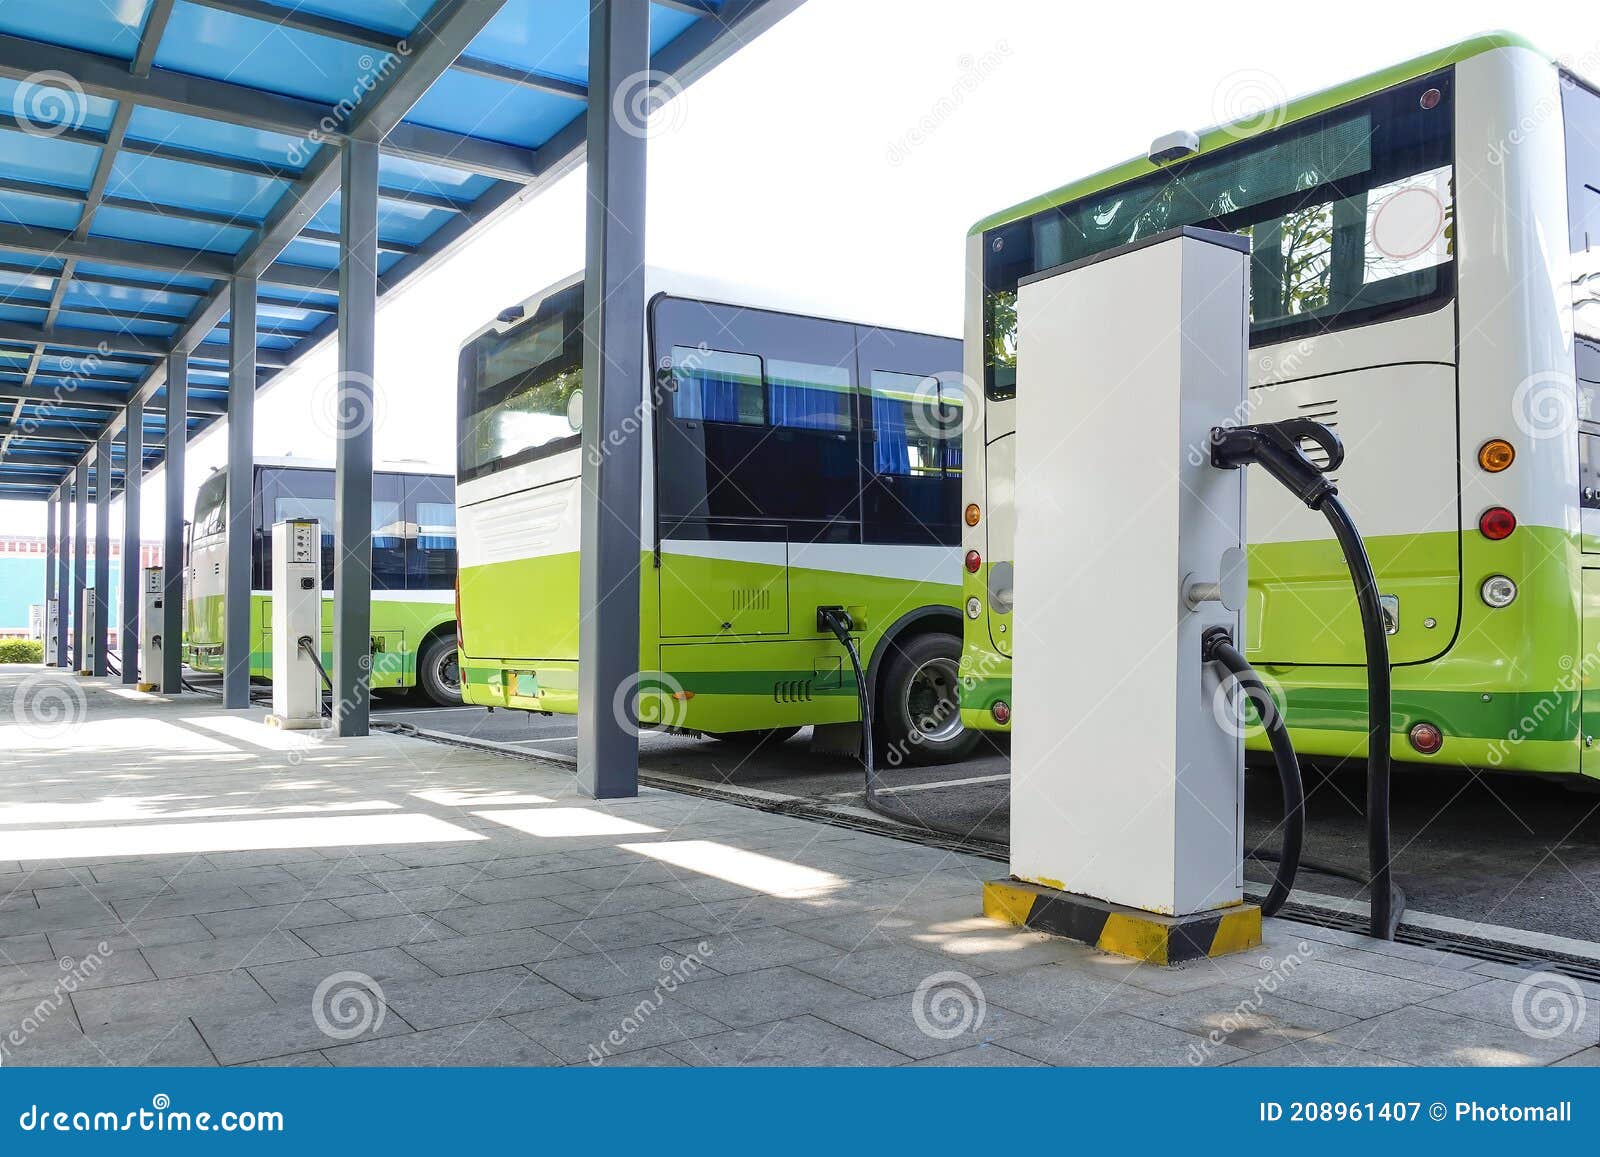 battery electric vehicle bev electrical bus charging pile